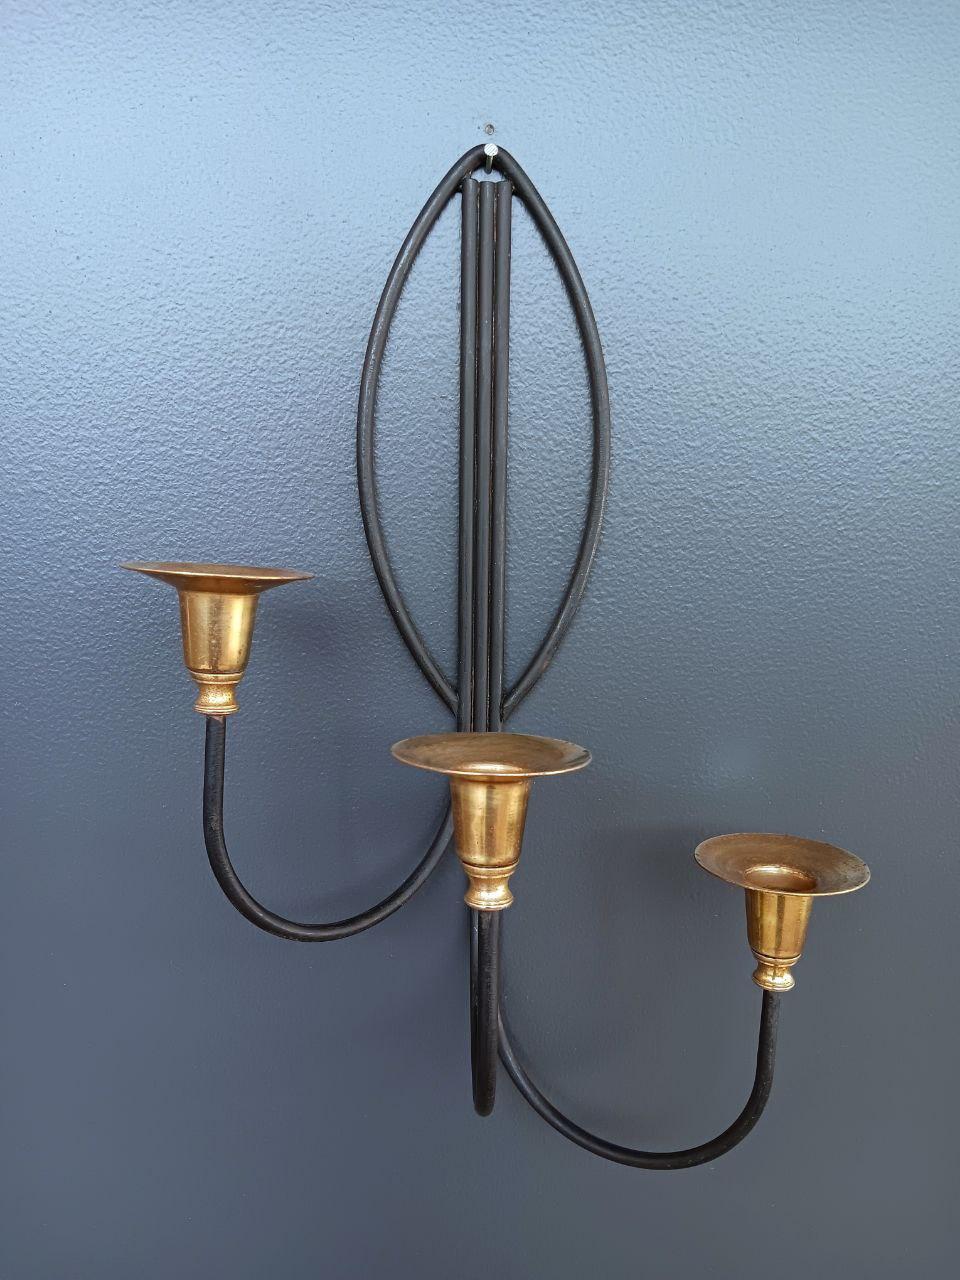 Pair of Mid-Century Modern Iron & Brass Candle Wall Sconces In Good Condition For Sale In Los Angeles, CA